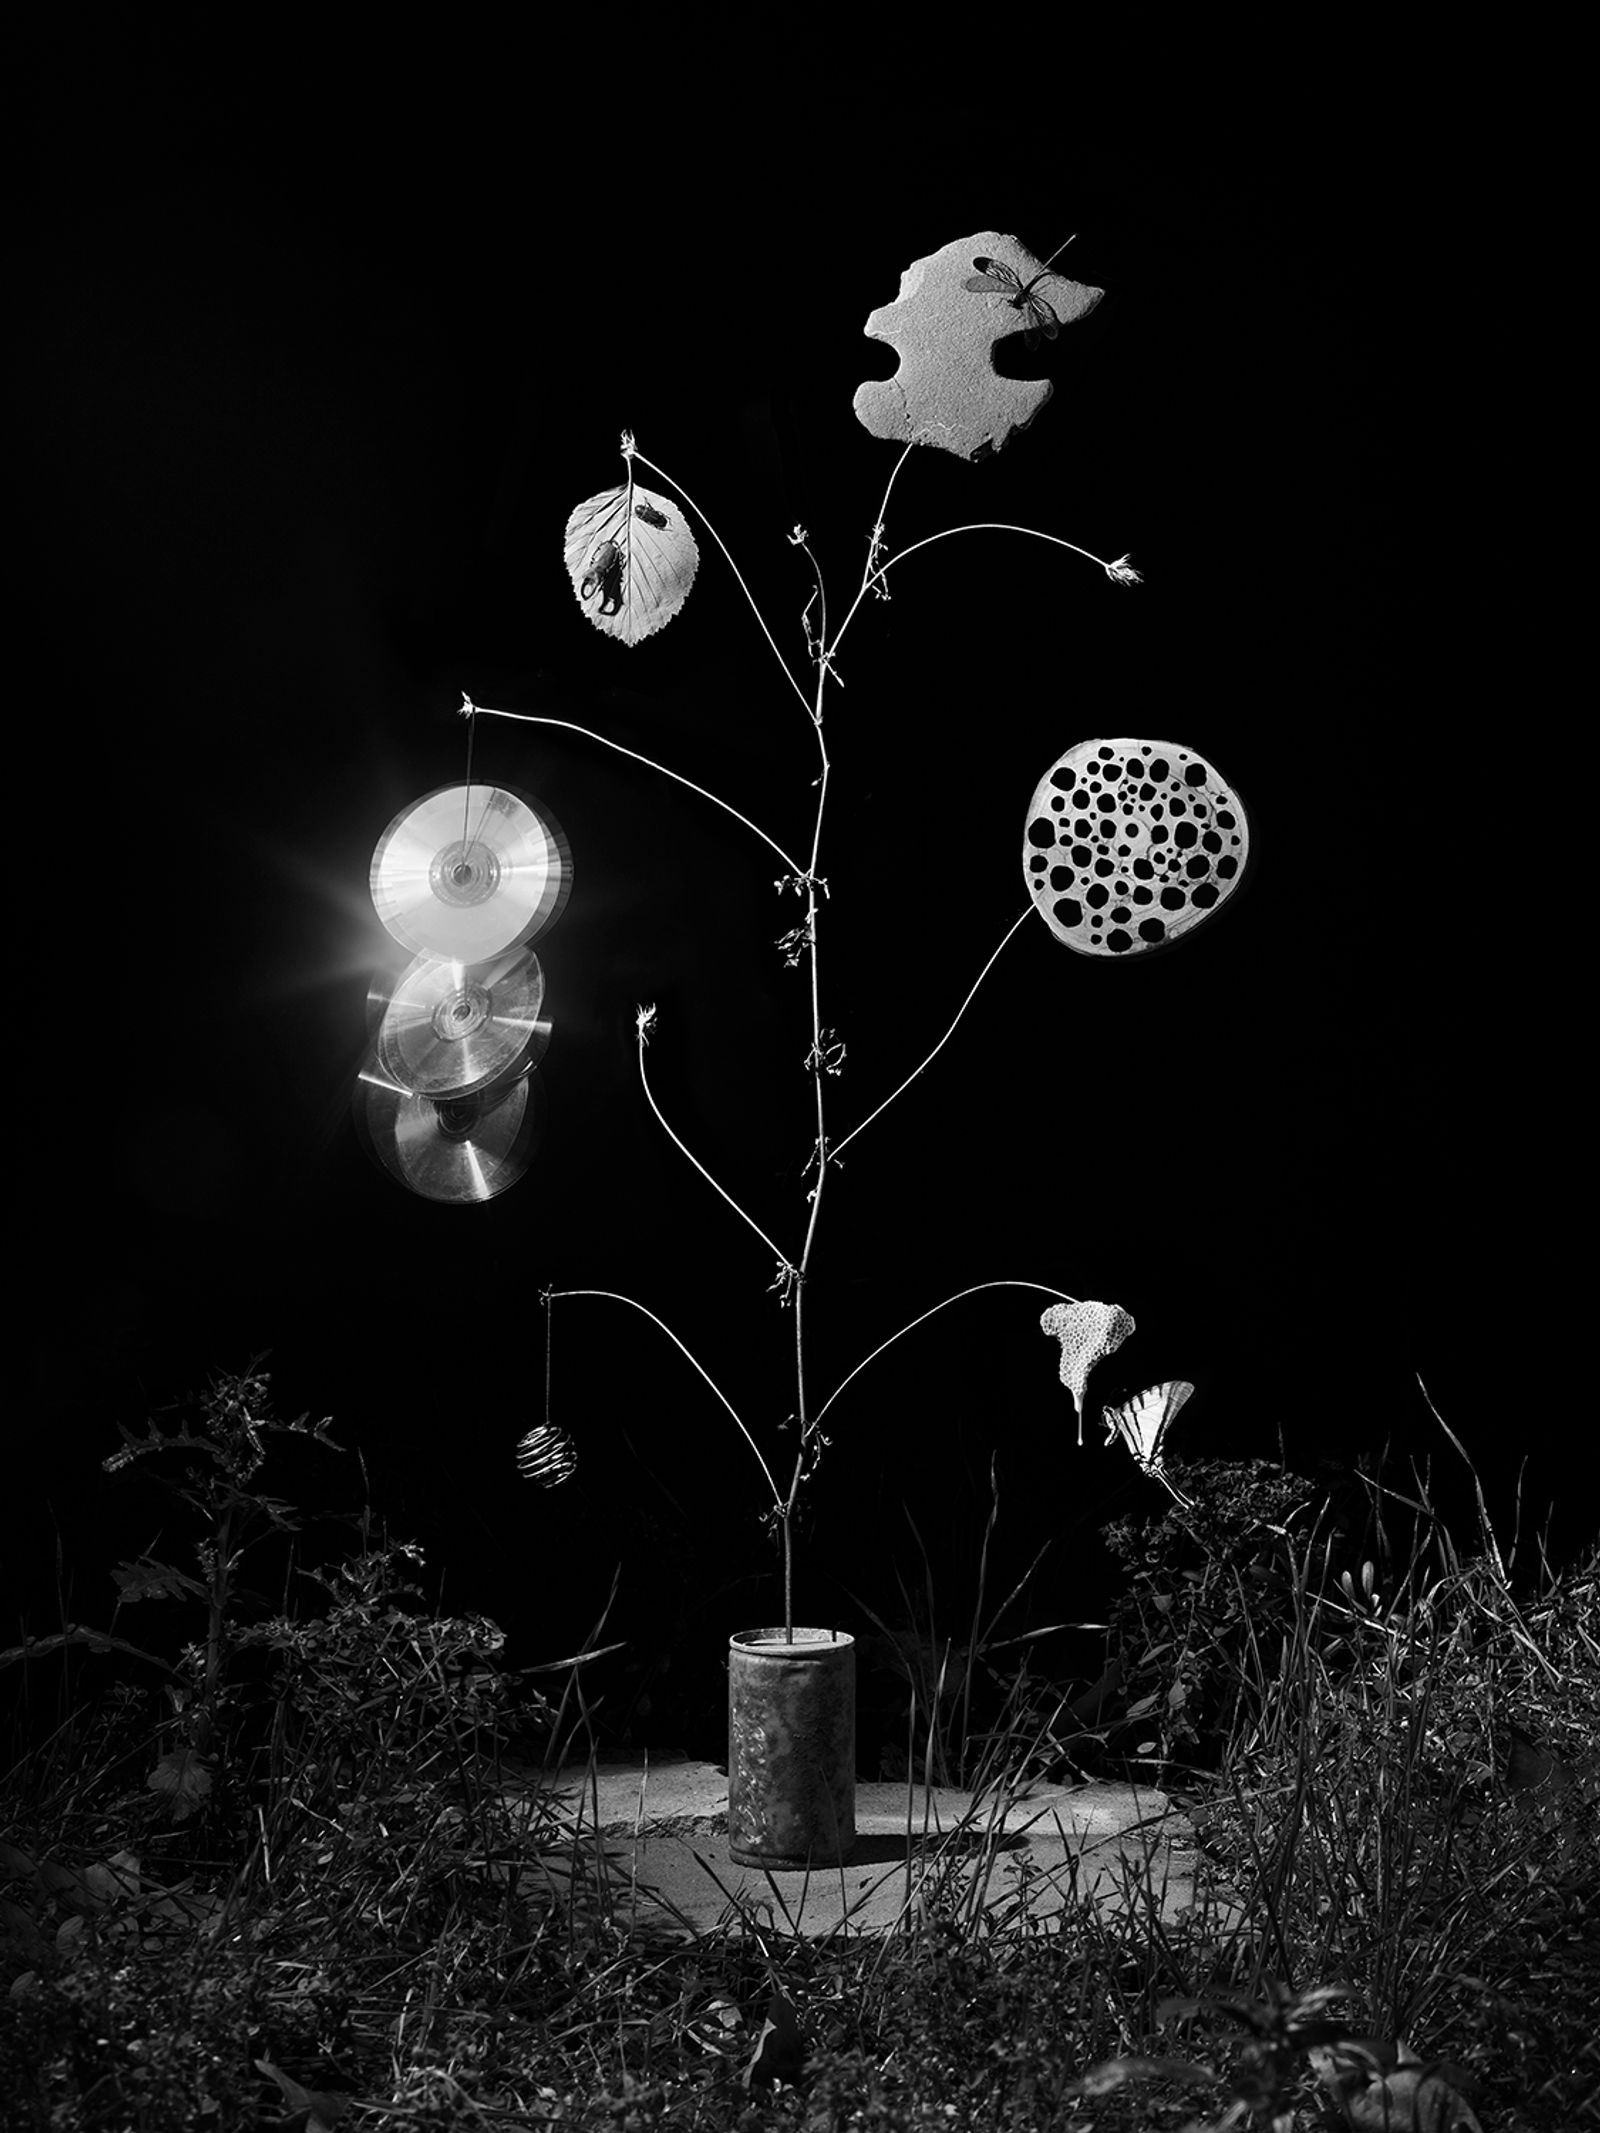 © Yurian Quintanas Nobel - Image from the The Ignorant Gardener photography project